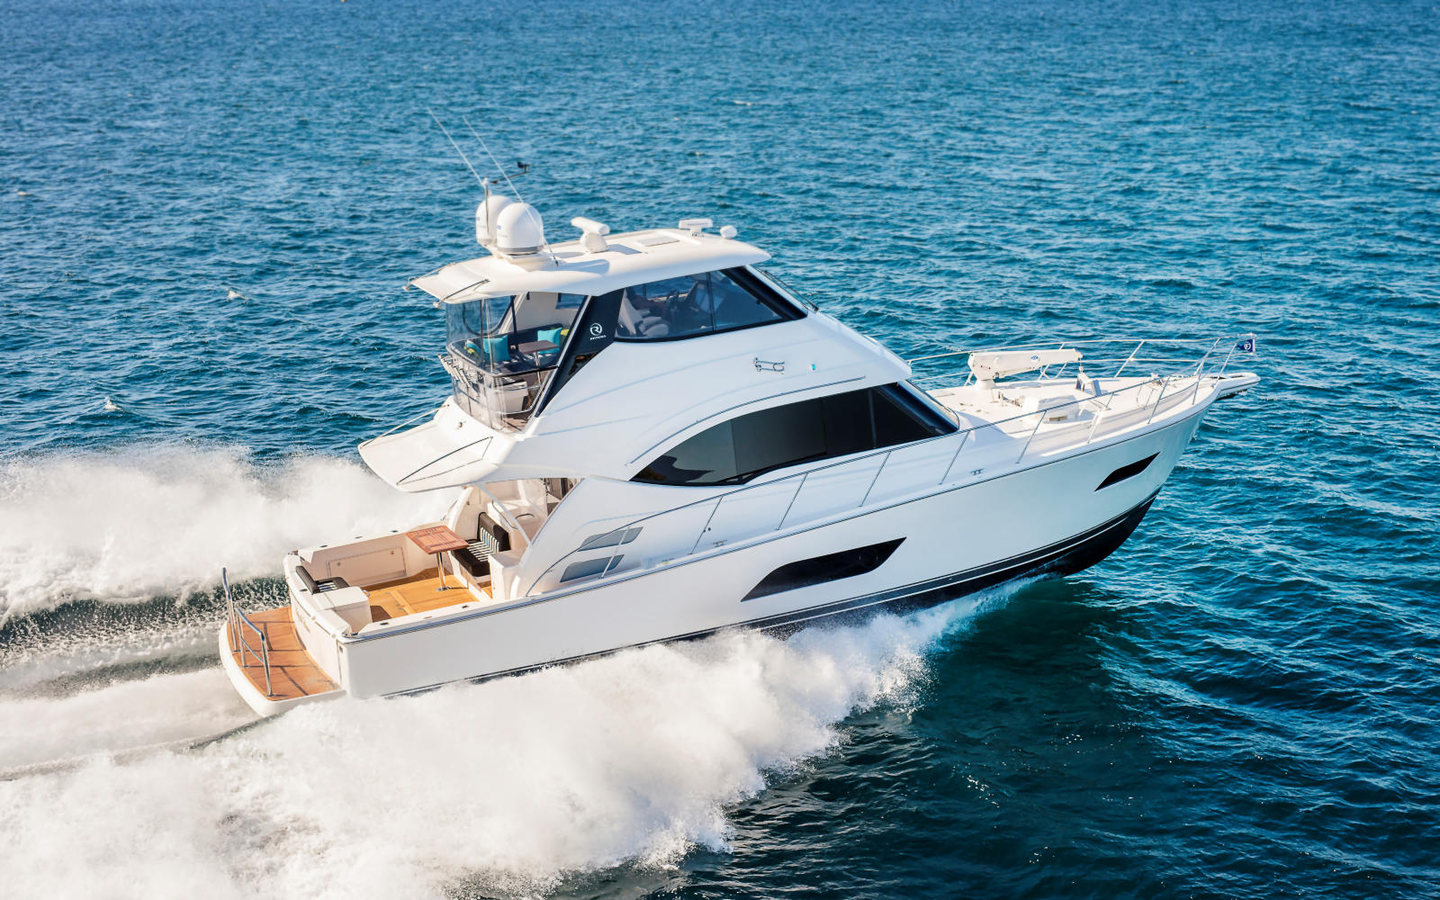 360 VR Virtual Tours of the Riviera 52 Enclosed Flybridge